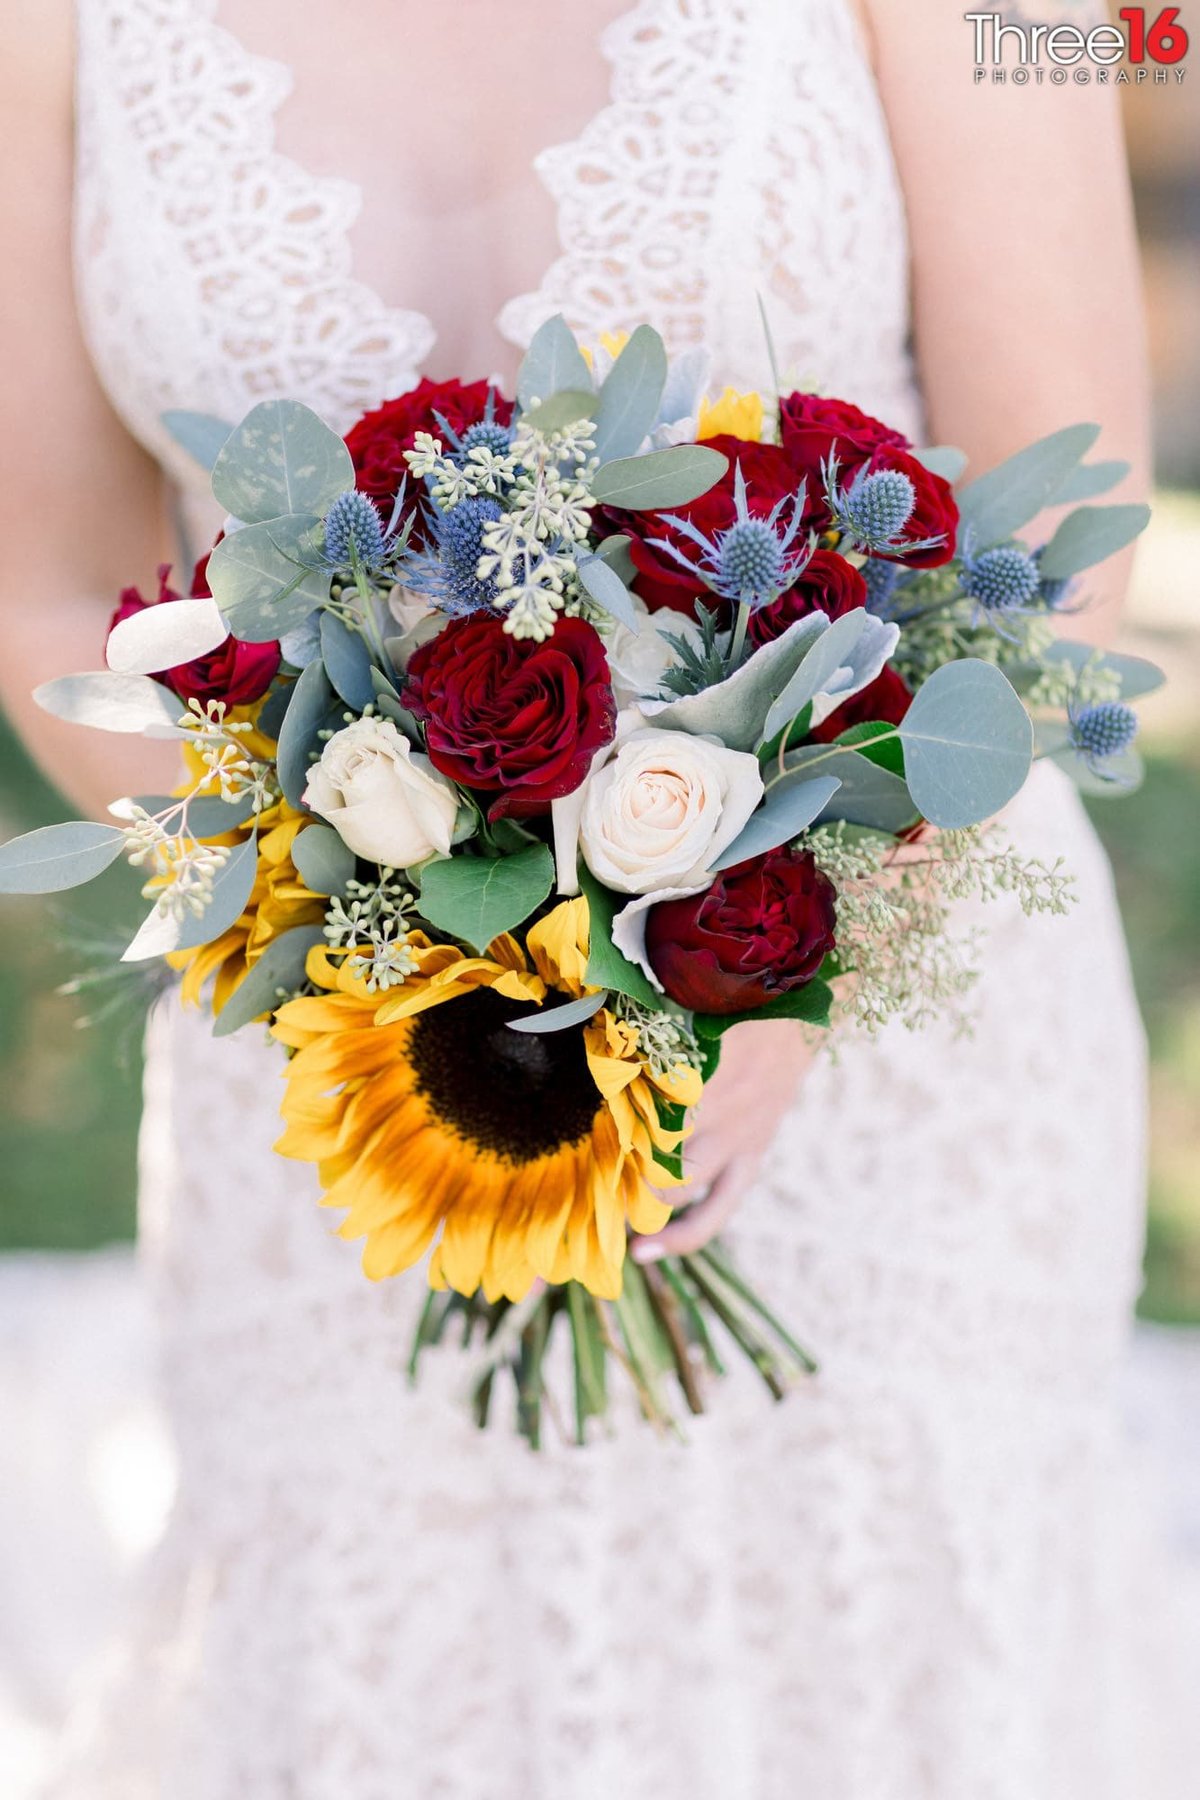 Beautiful bouquet of flowers held by the Bride